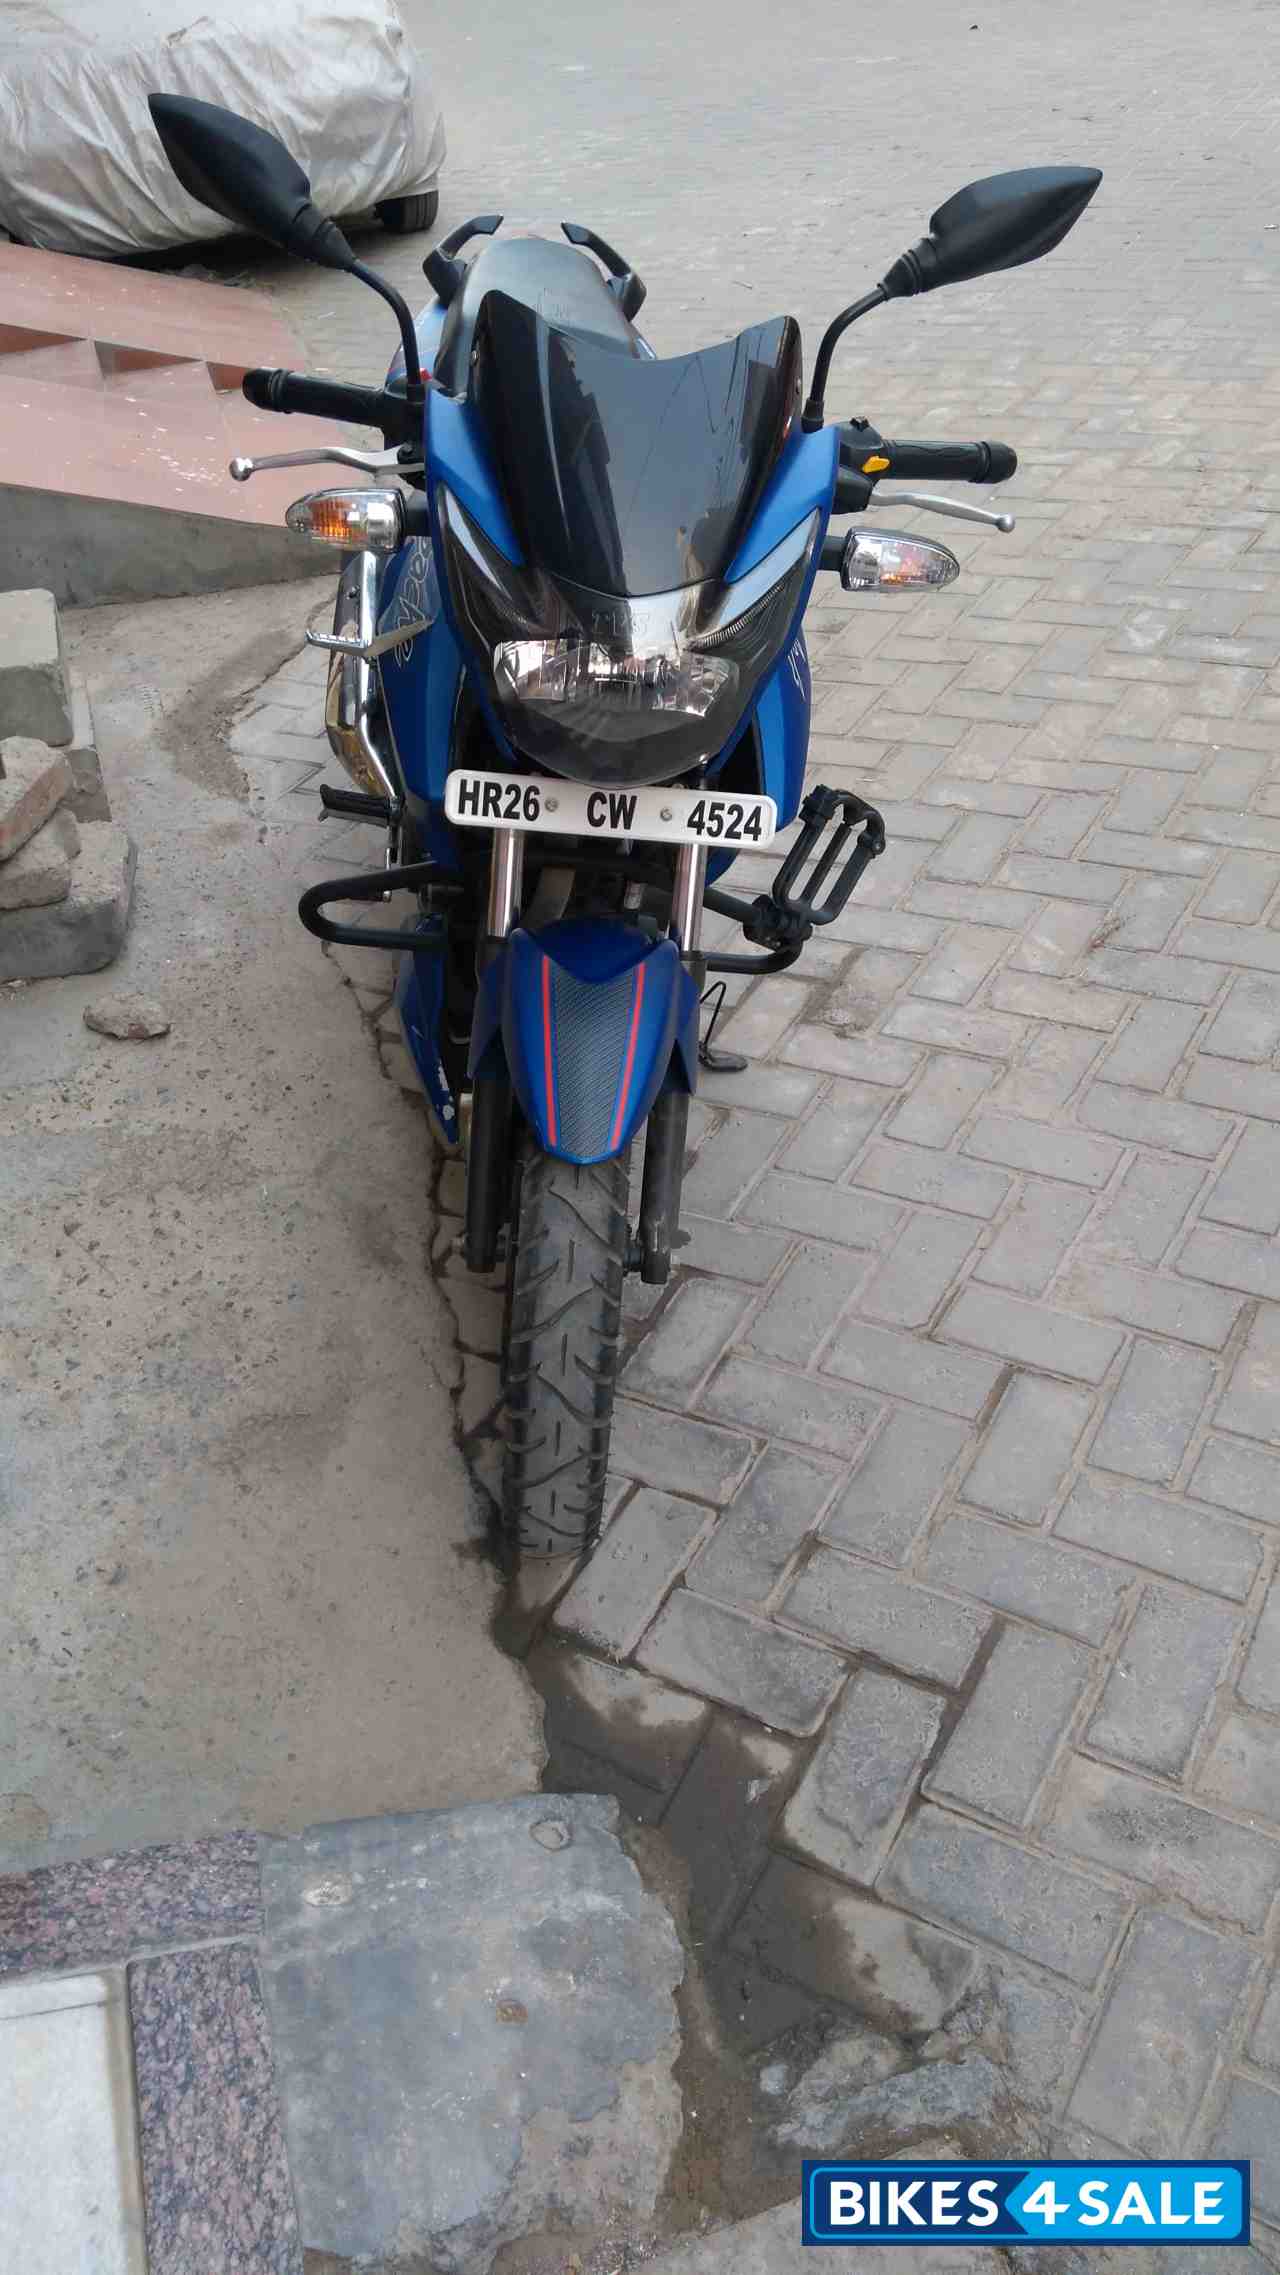 Used 2016 Model Tvs Apache Rtr 160 For Sale In Gurgaon Id 192518 Matte Blue Colour Bikes4sale